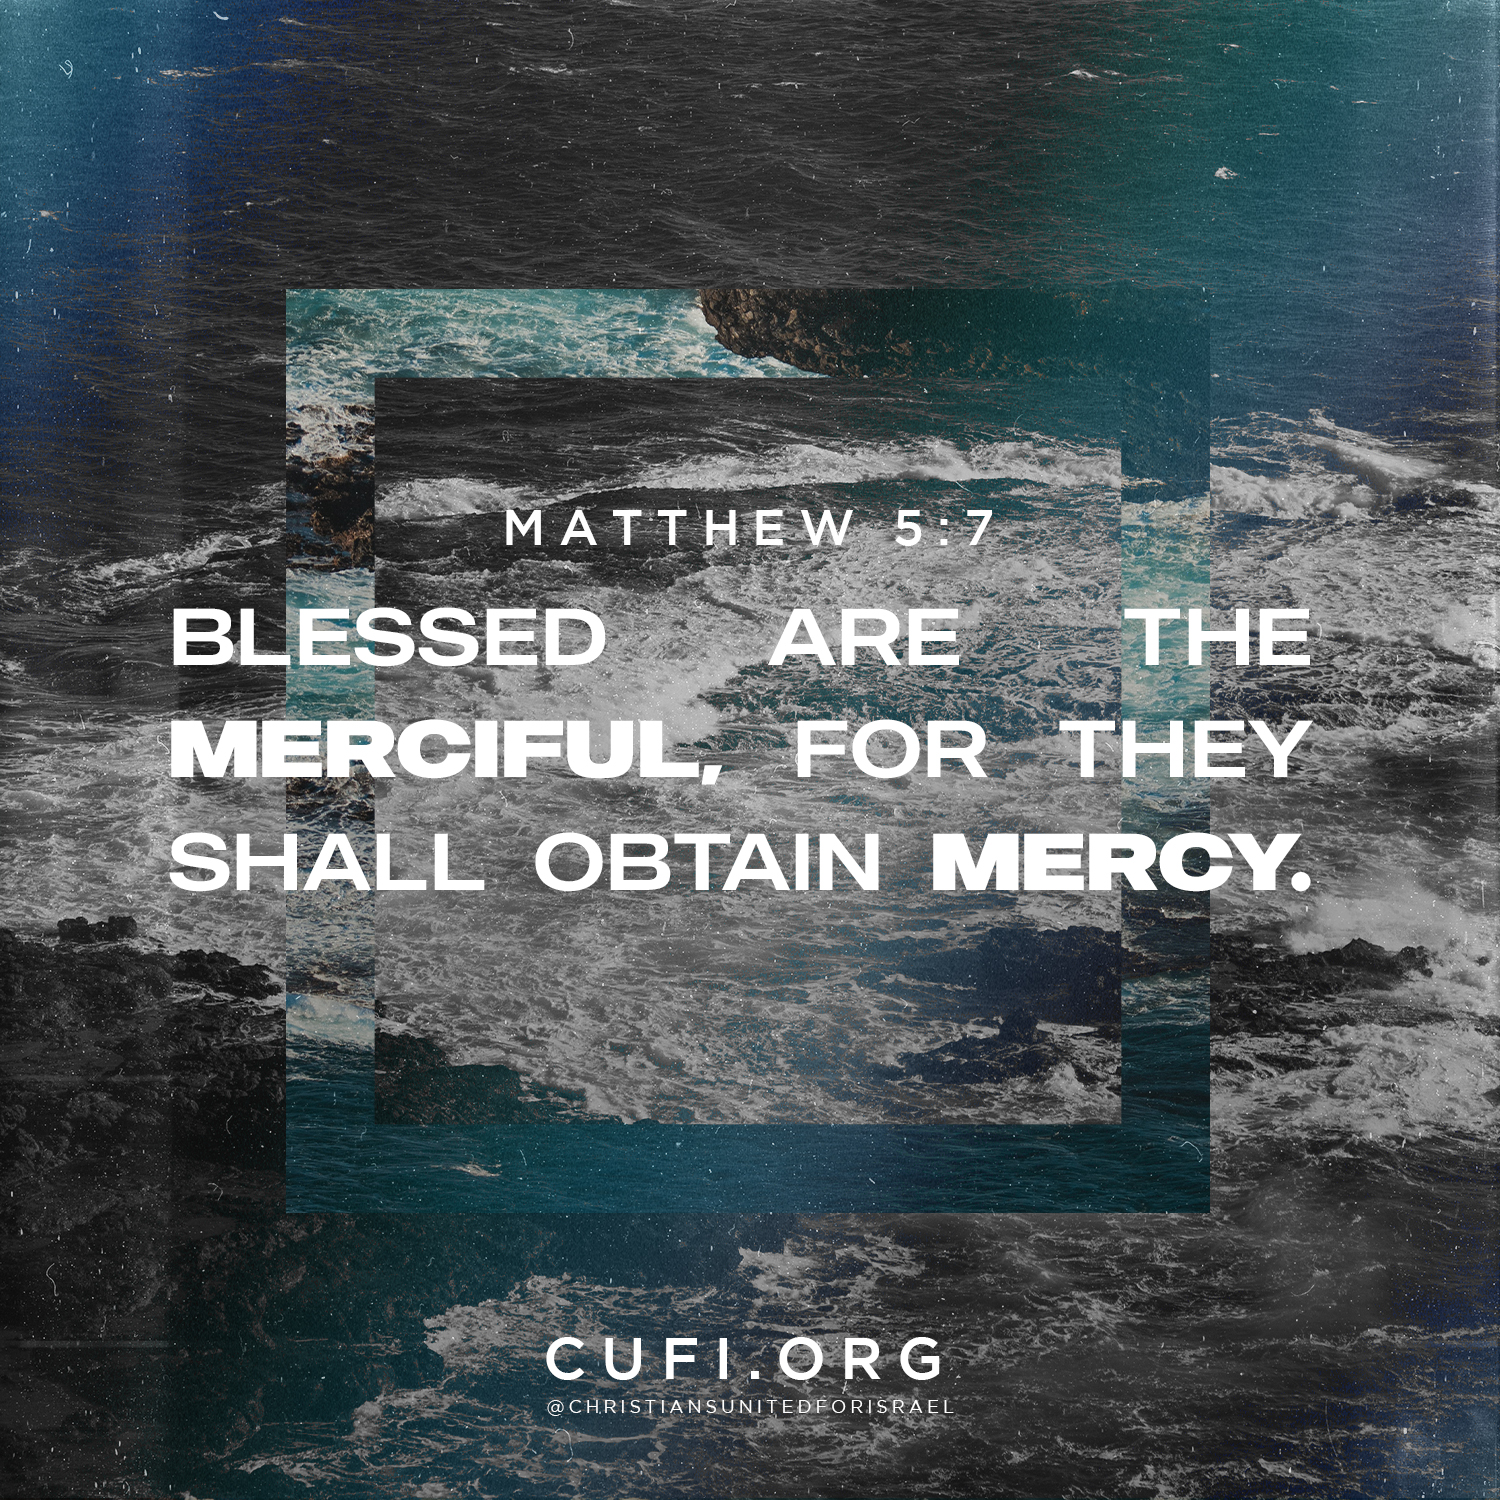 'MATTHEW 5:7 5:7 BLESSED ARE THE MERCIFUL, FOR THEY SHALL OBTAIN MERCY. CUFI.ORG @CH.R1S ISTIANSUNITEDFOR SRAEL'